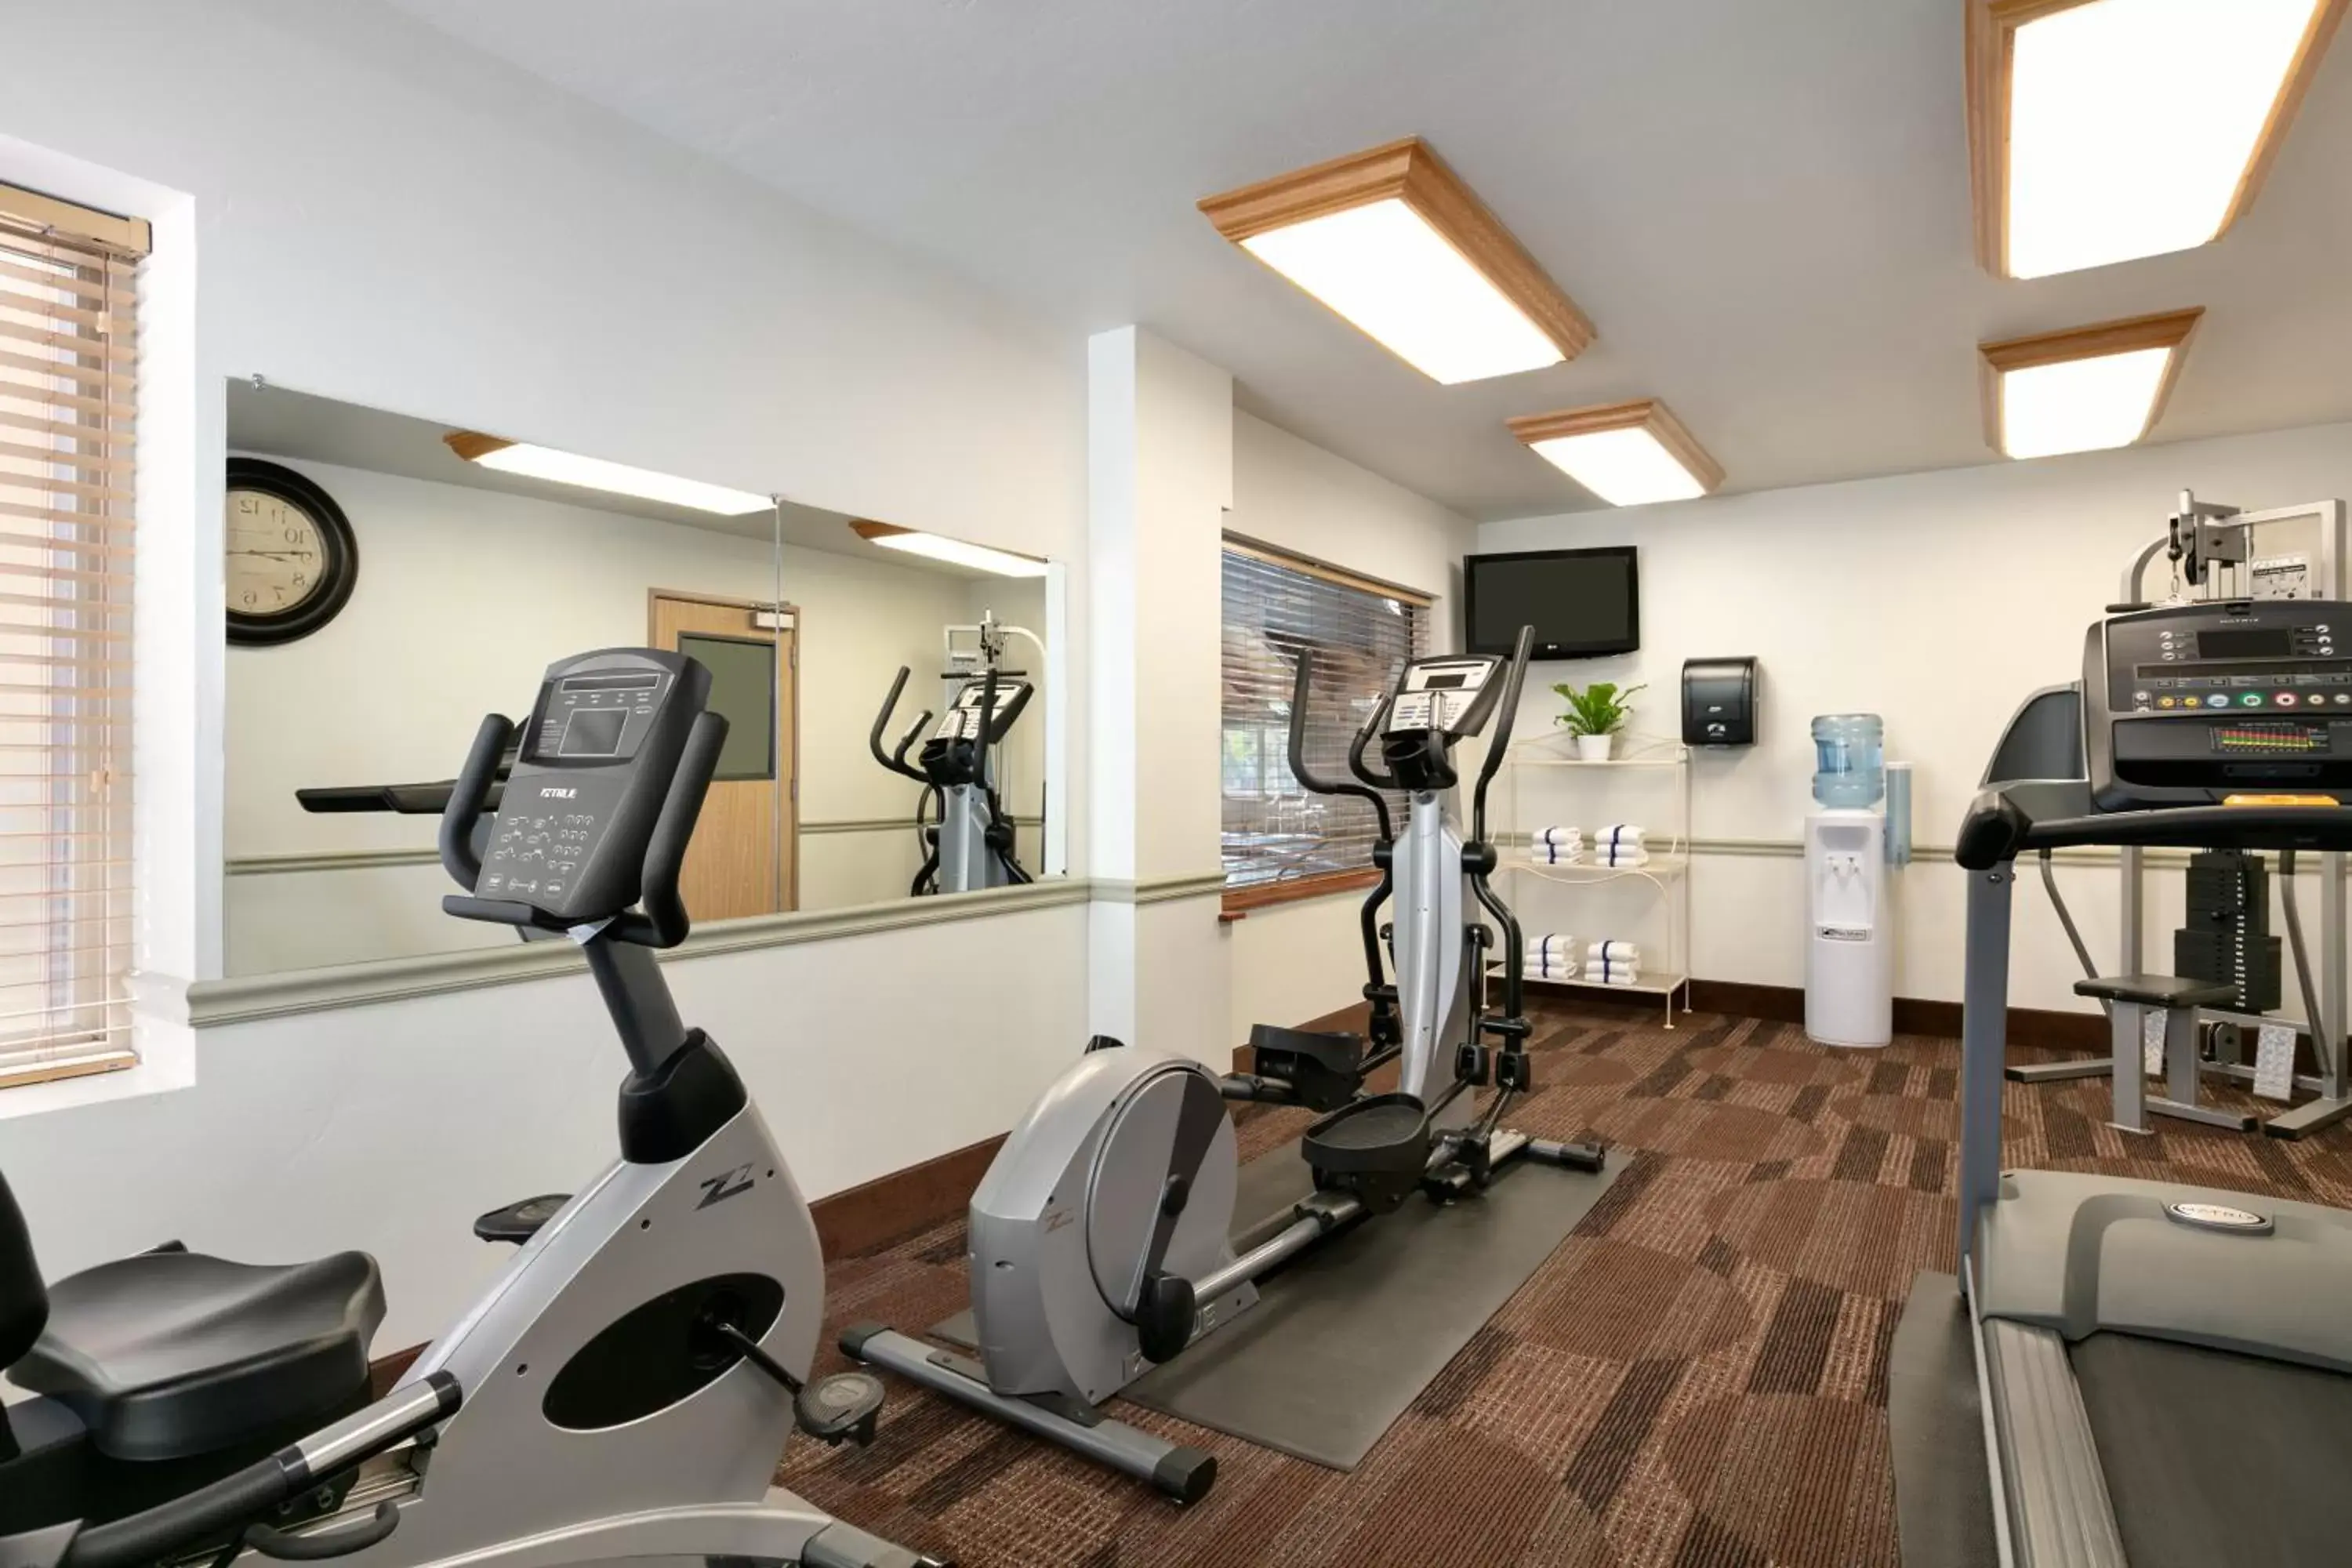 Fitness centre/facilities in Mountain Valley Lodge Hailey Sun Valley